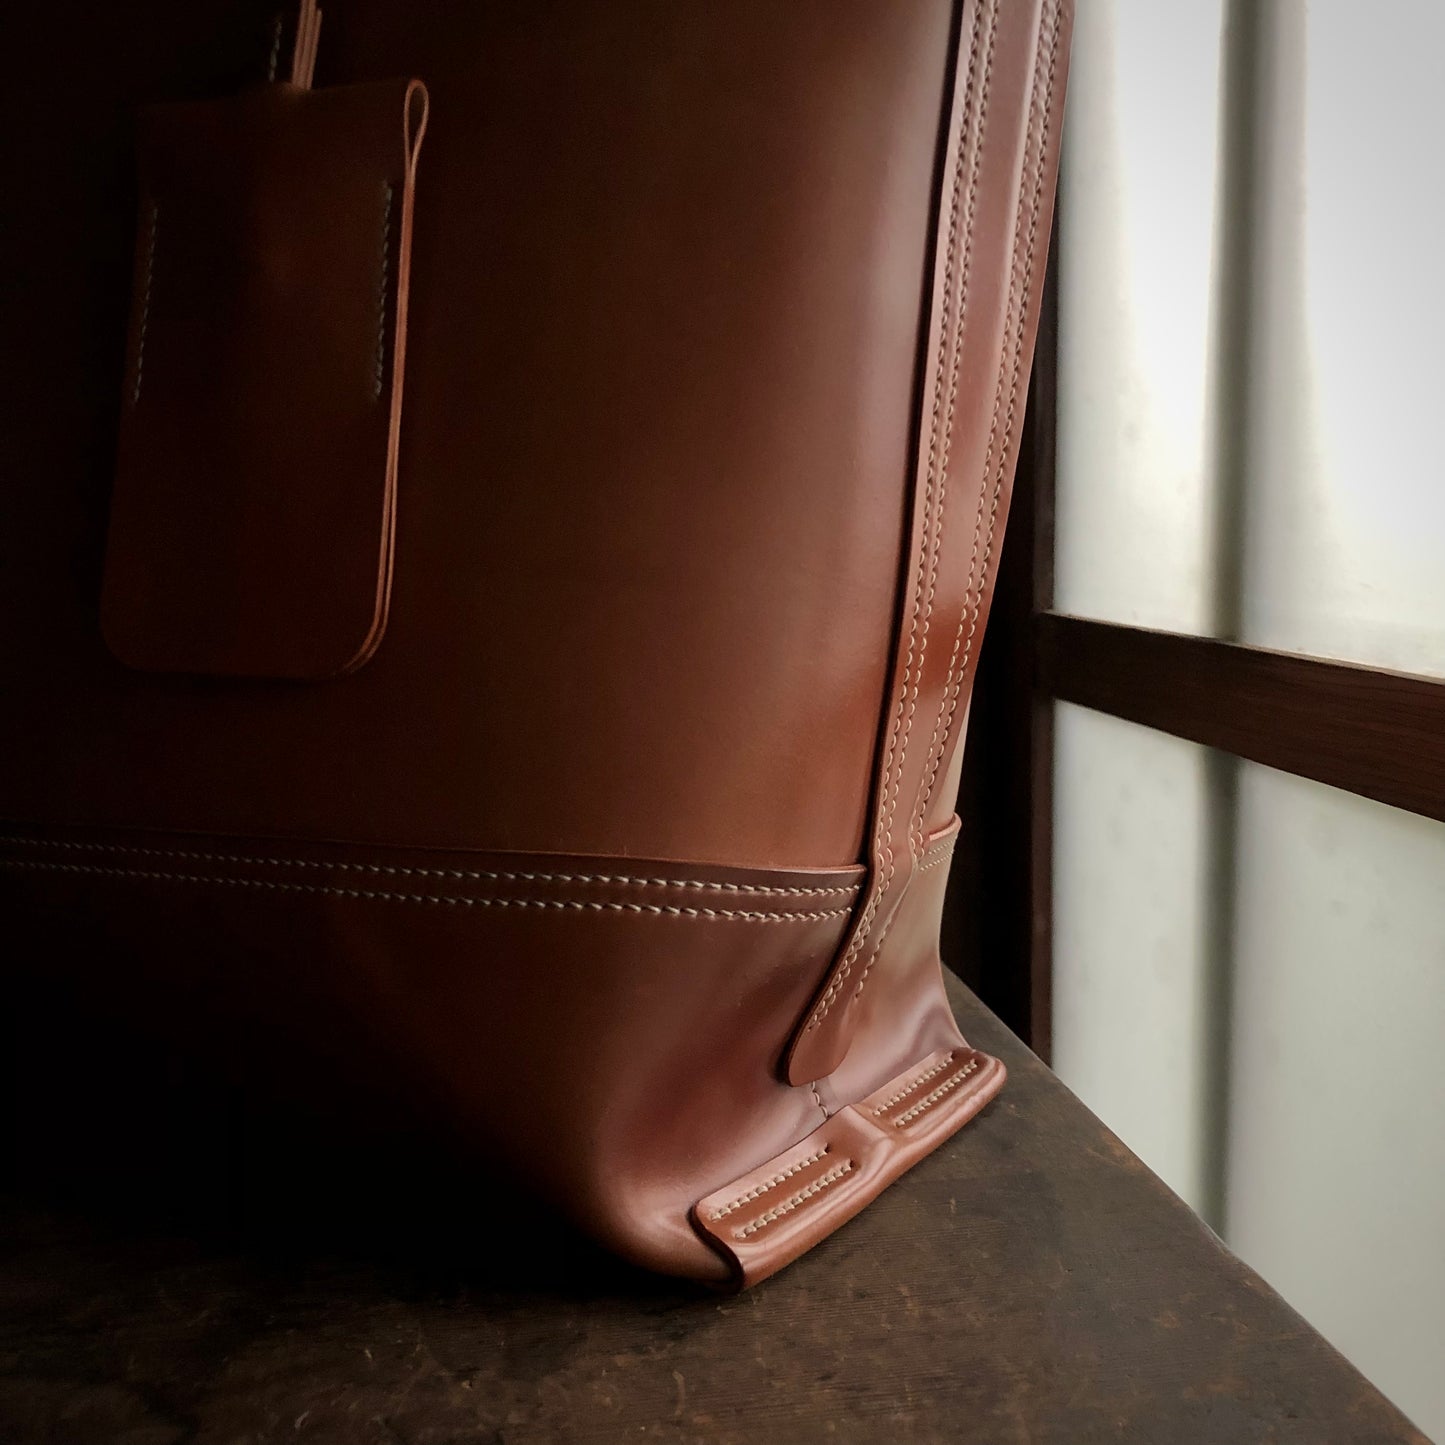 Shell Tote【Horween】シェルコードバンのトートバッグ